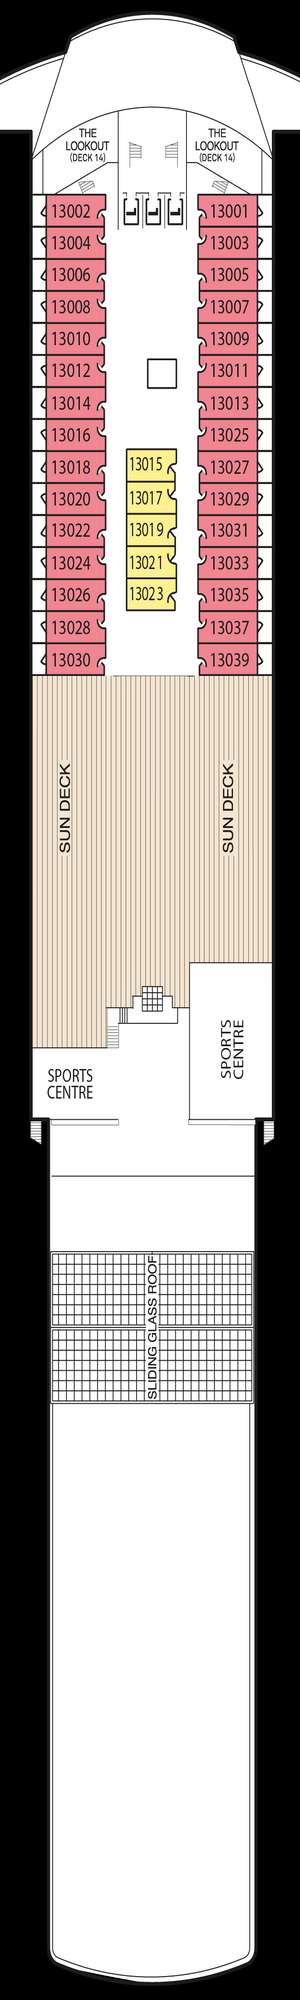 Deck plan for Queen Mary 2